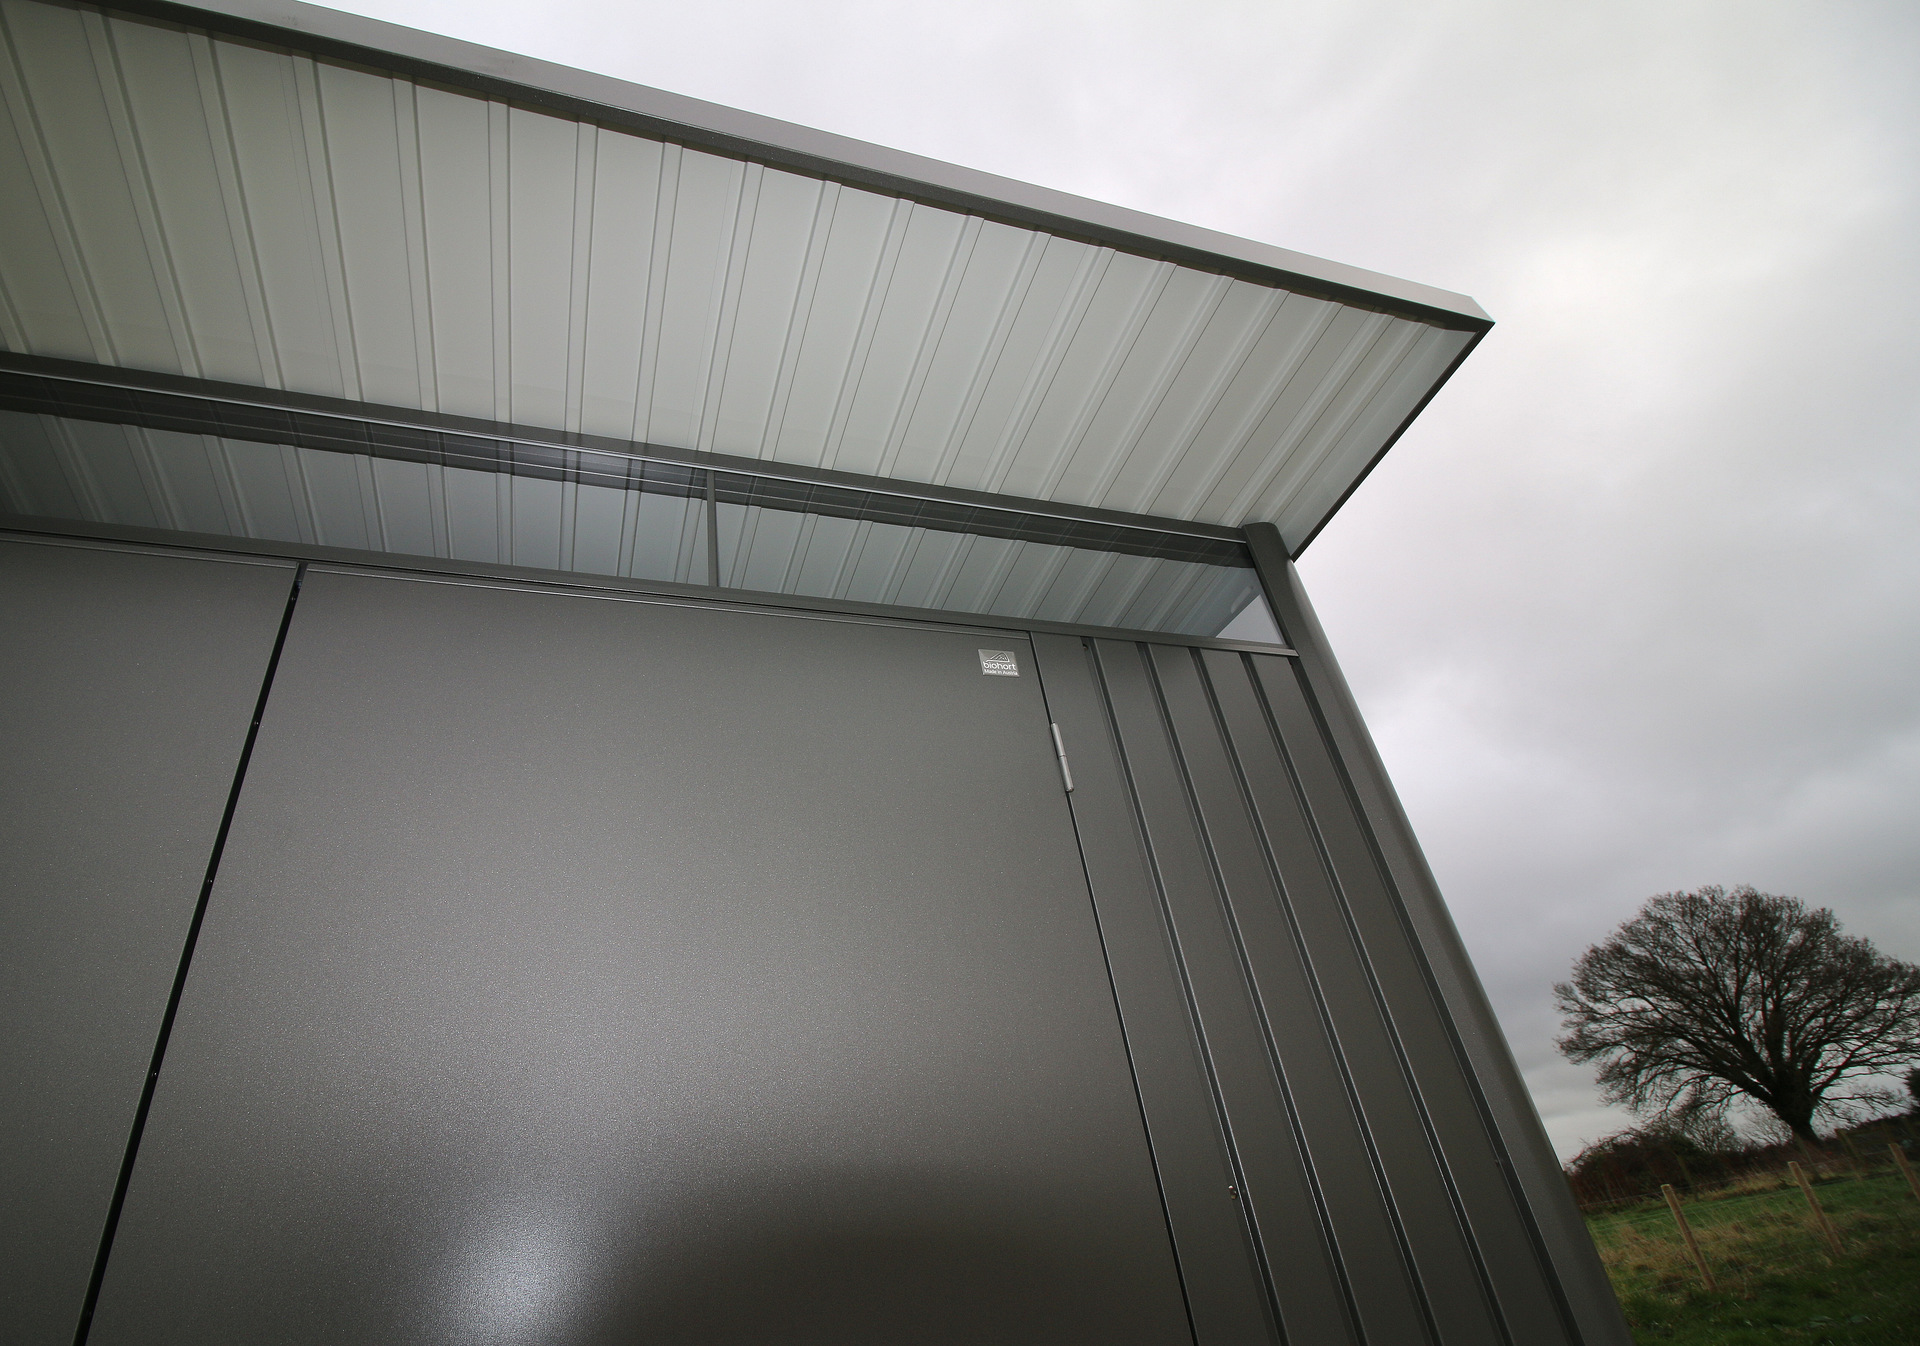 The stunning Biohort AvantGarde A6 garden shed in metallic quartz grey, supplied + fitted in Portadown  | Owen Chubb Garden Landscapers, Ireland's #1 Biohort Dealer offering unbeatable value and full supply + fit services nationwide.